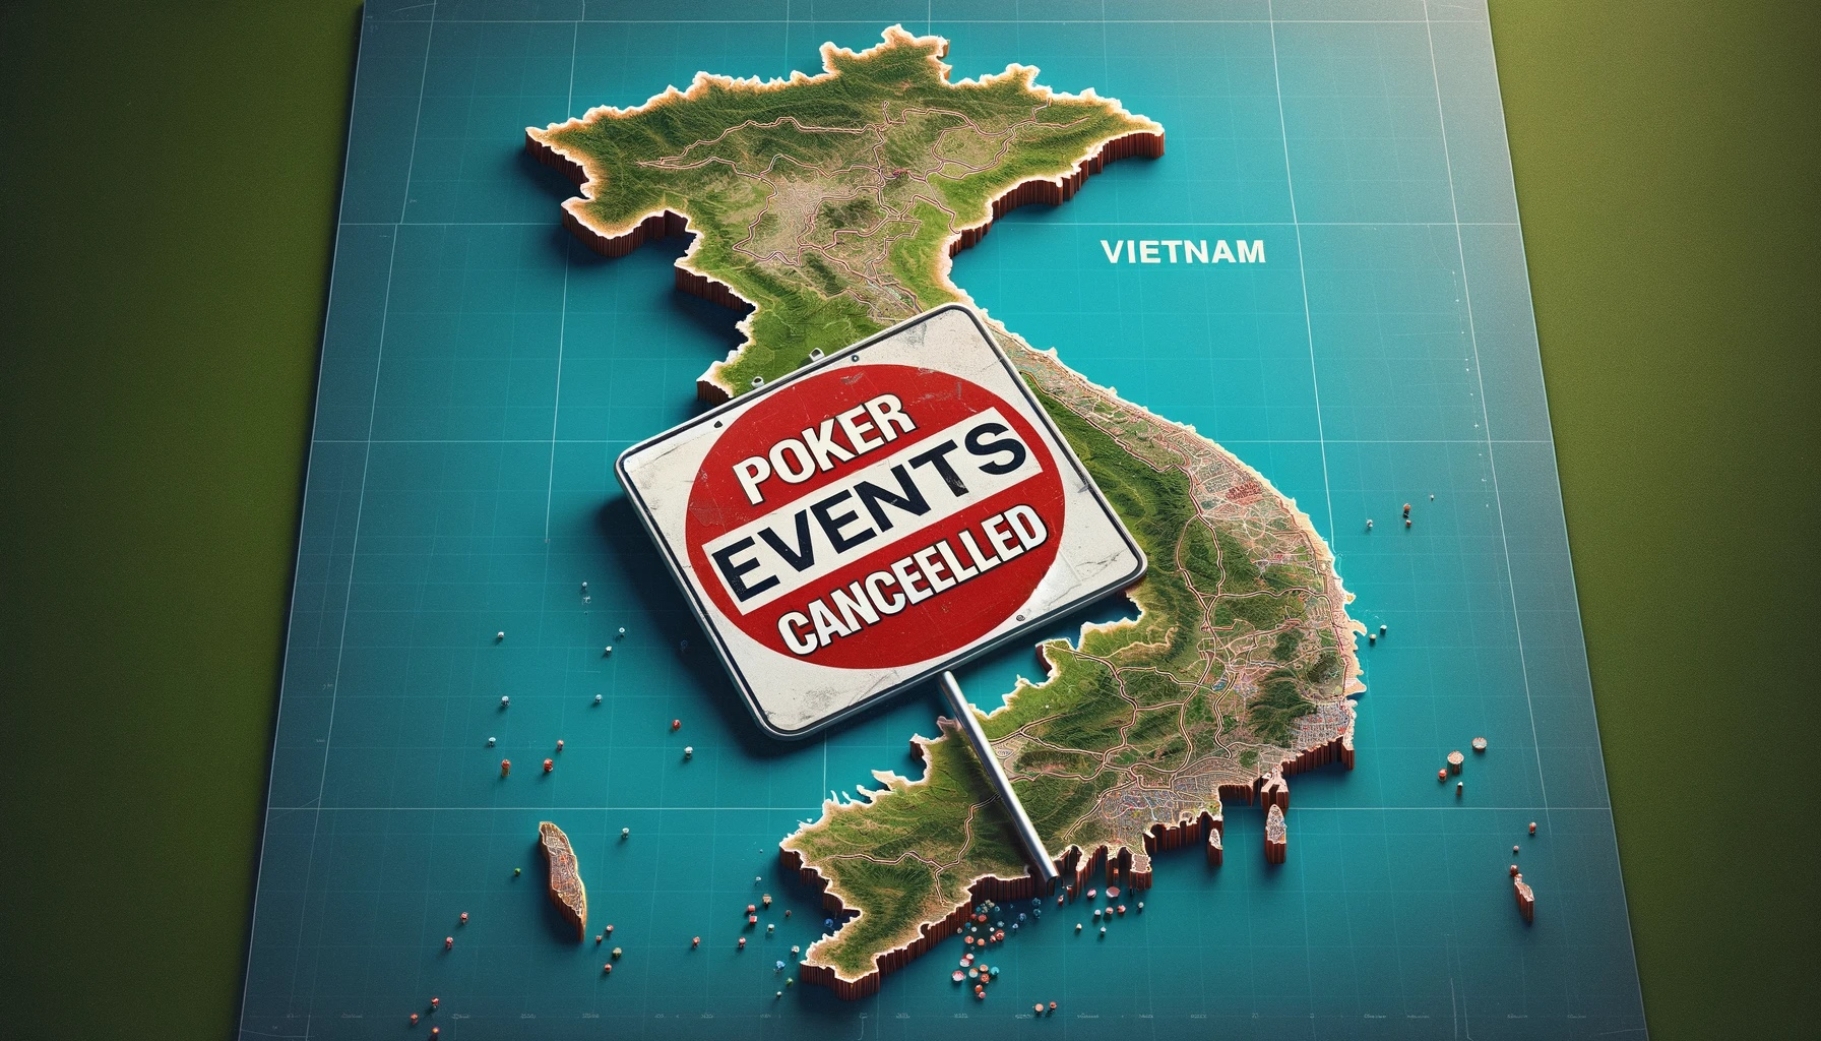 Poker Events Cancelled in Vietnam